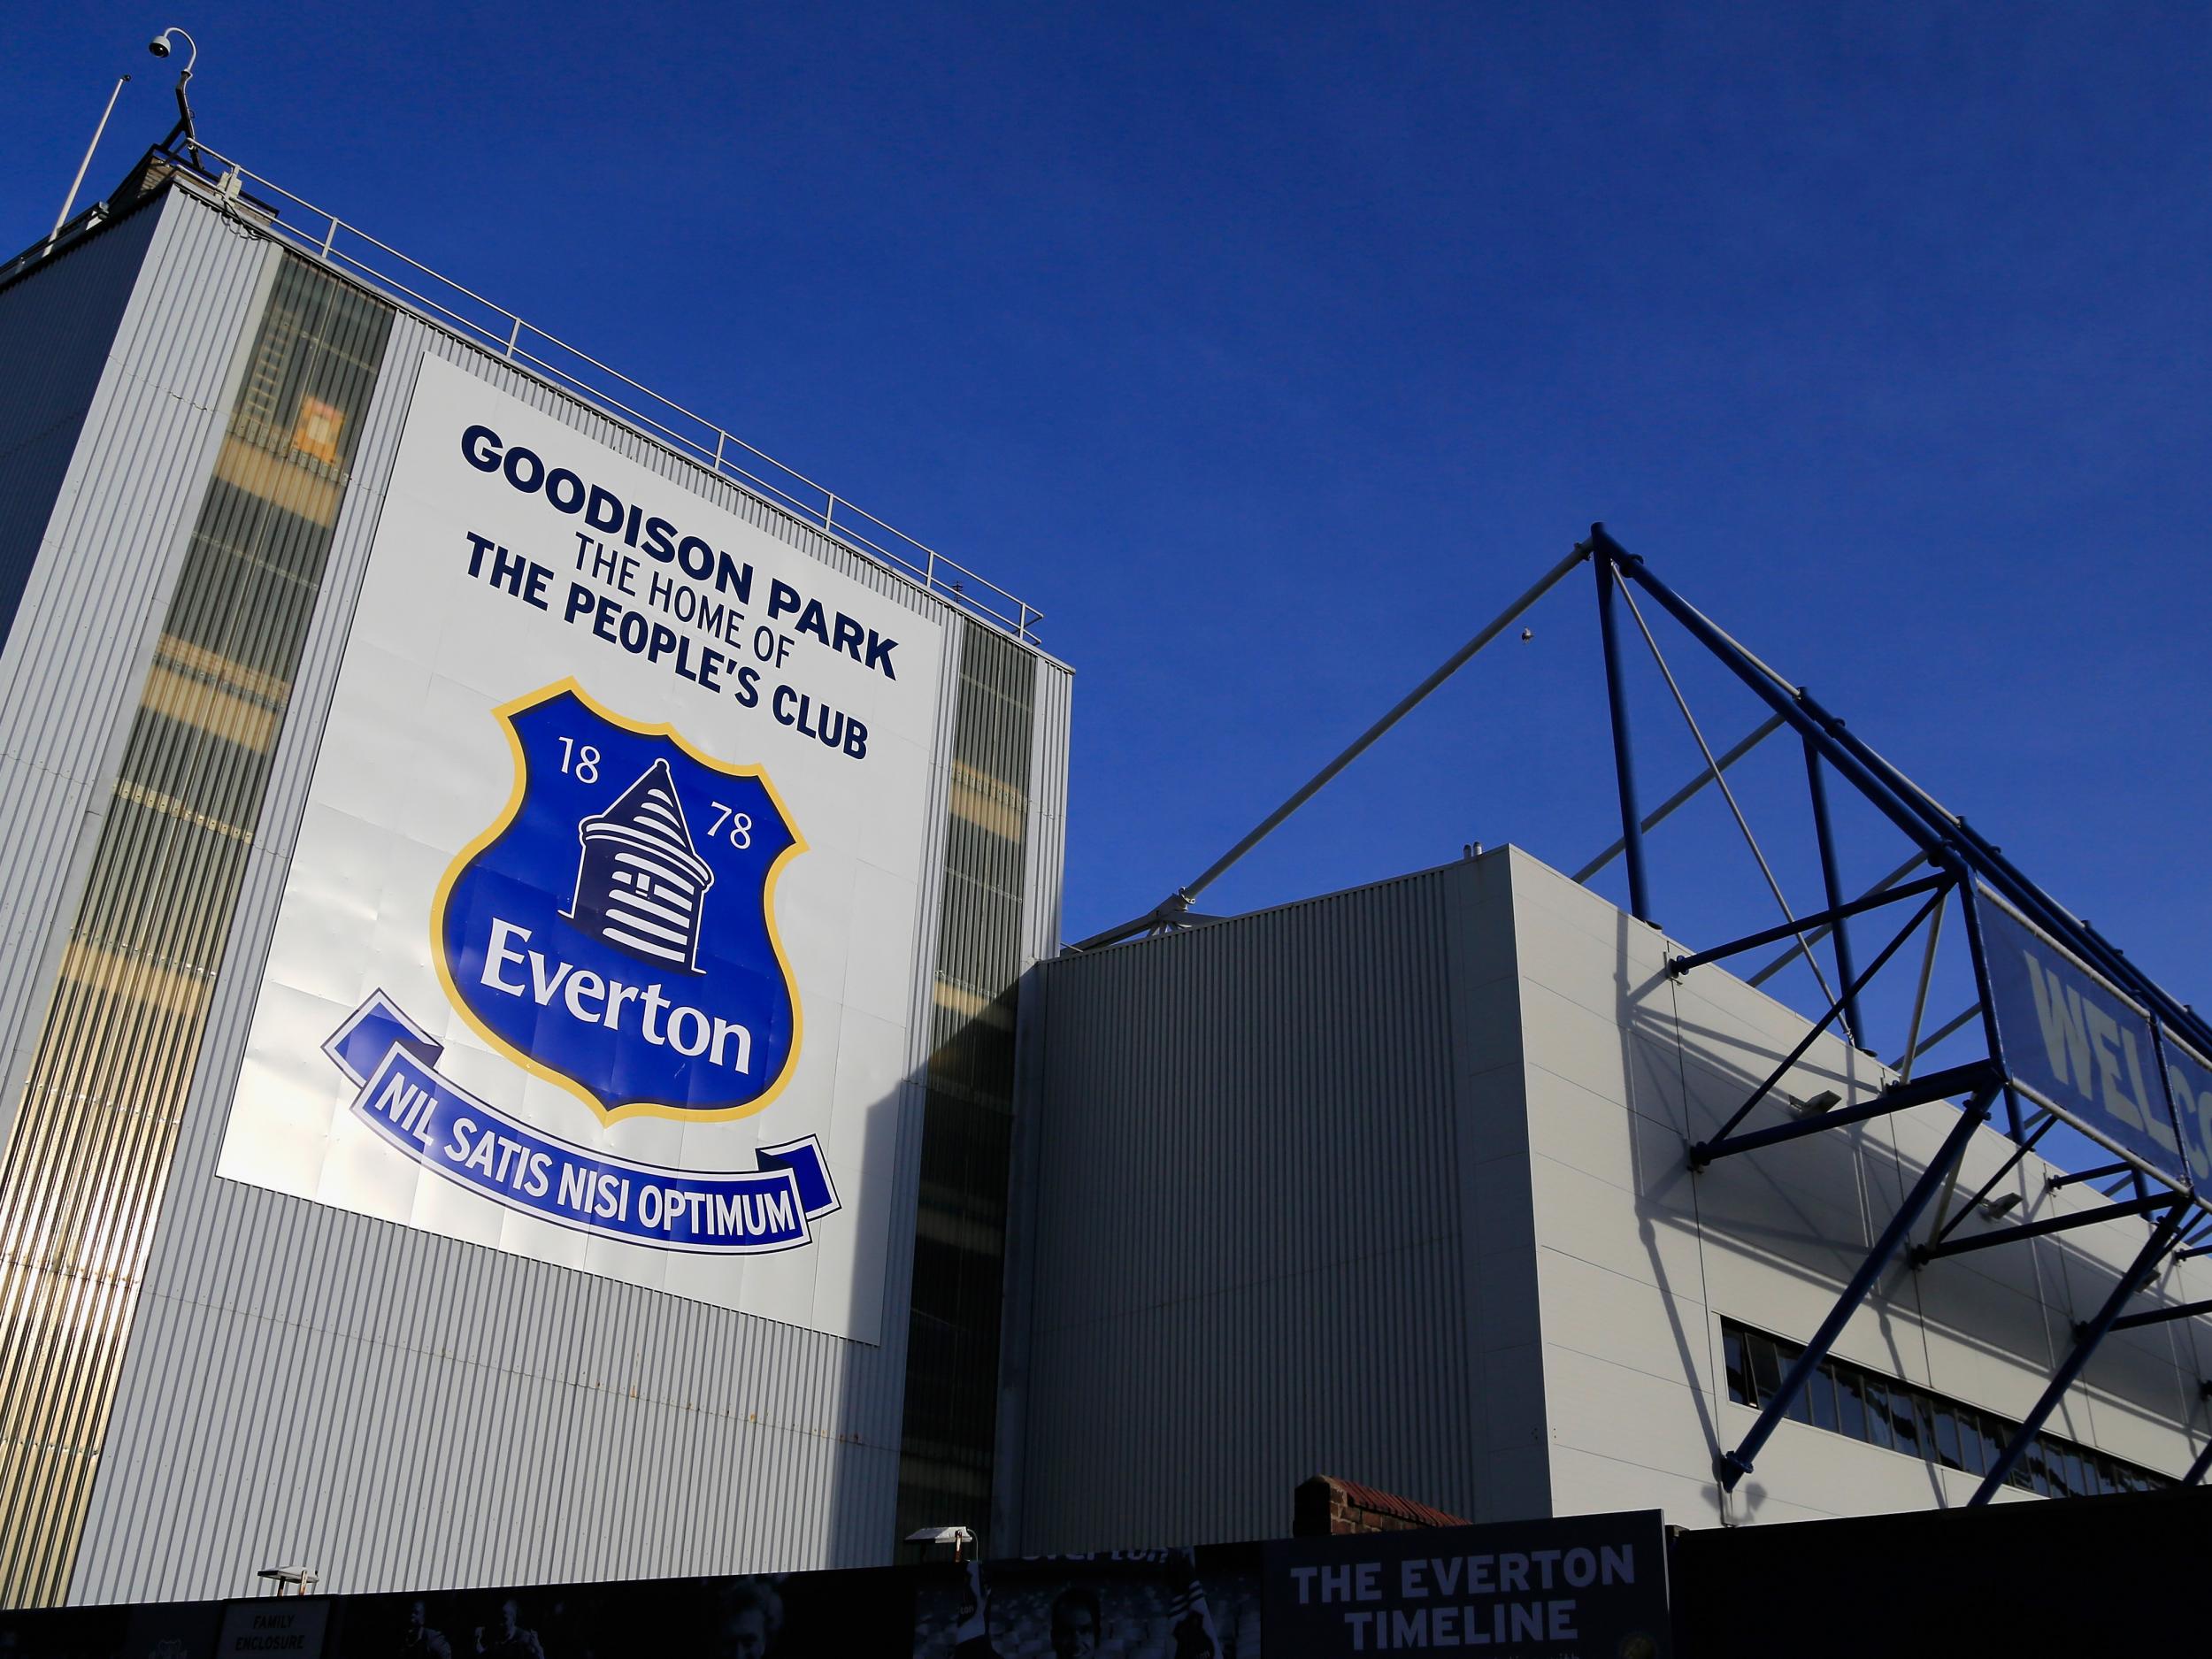 It has not been confirmed when Everton will leave Goodison Park